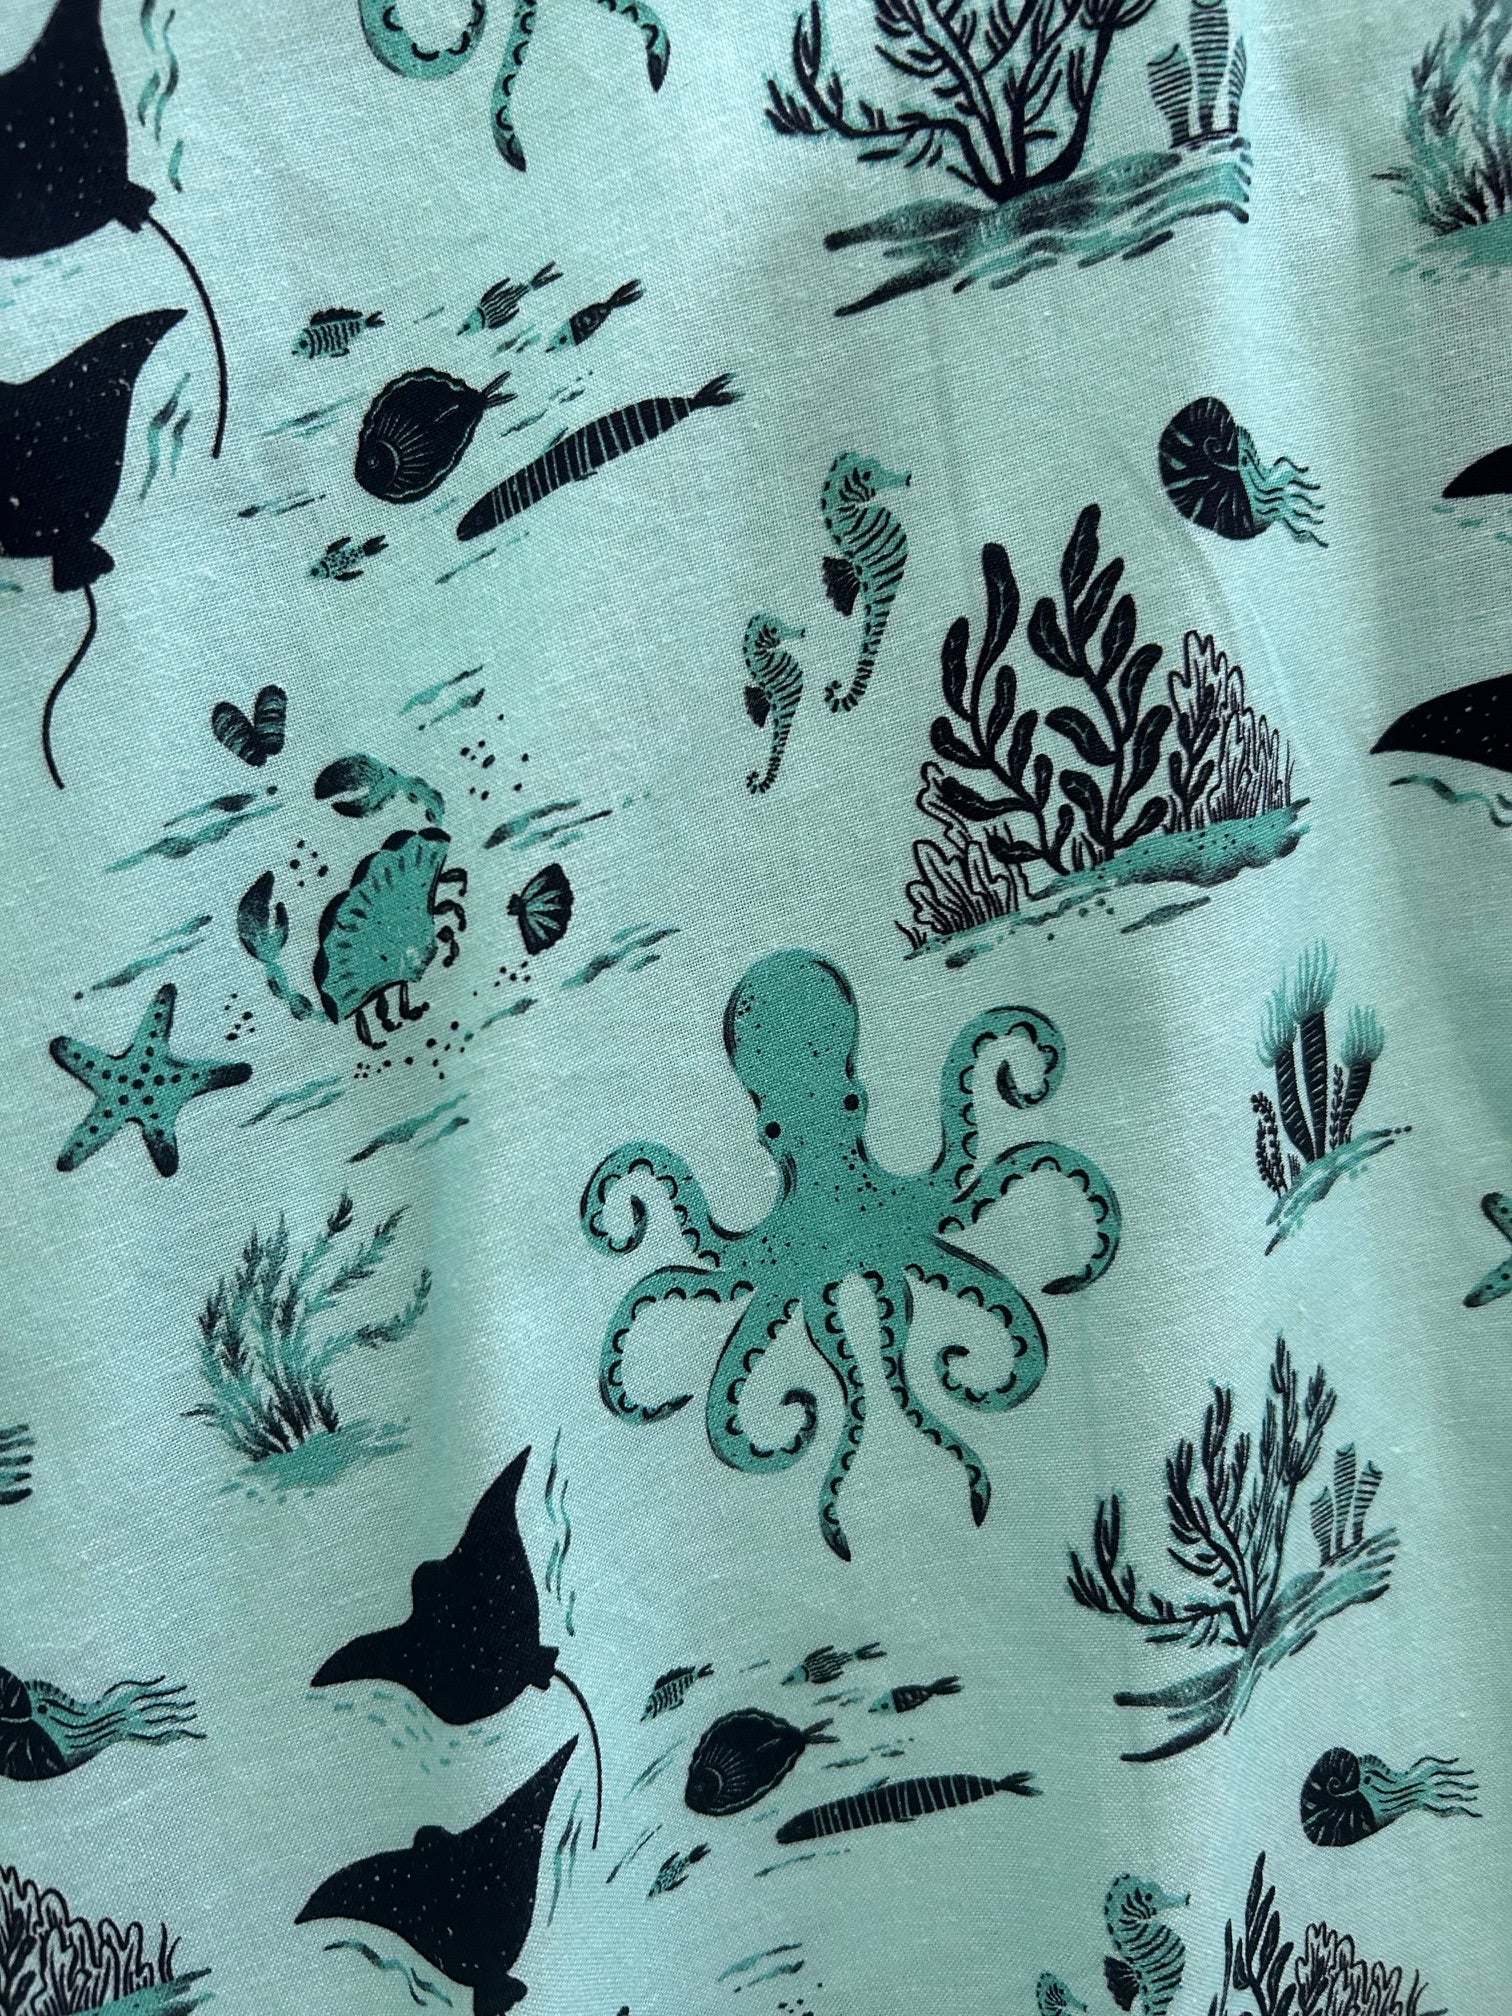 a close up of fabric print showing sea life like octopus, sea horse and fish